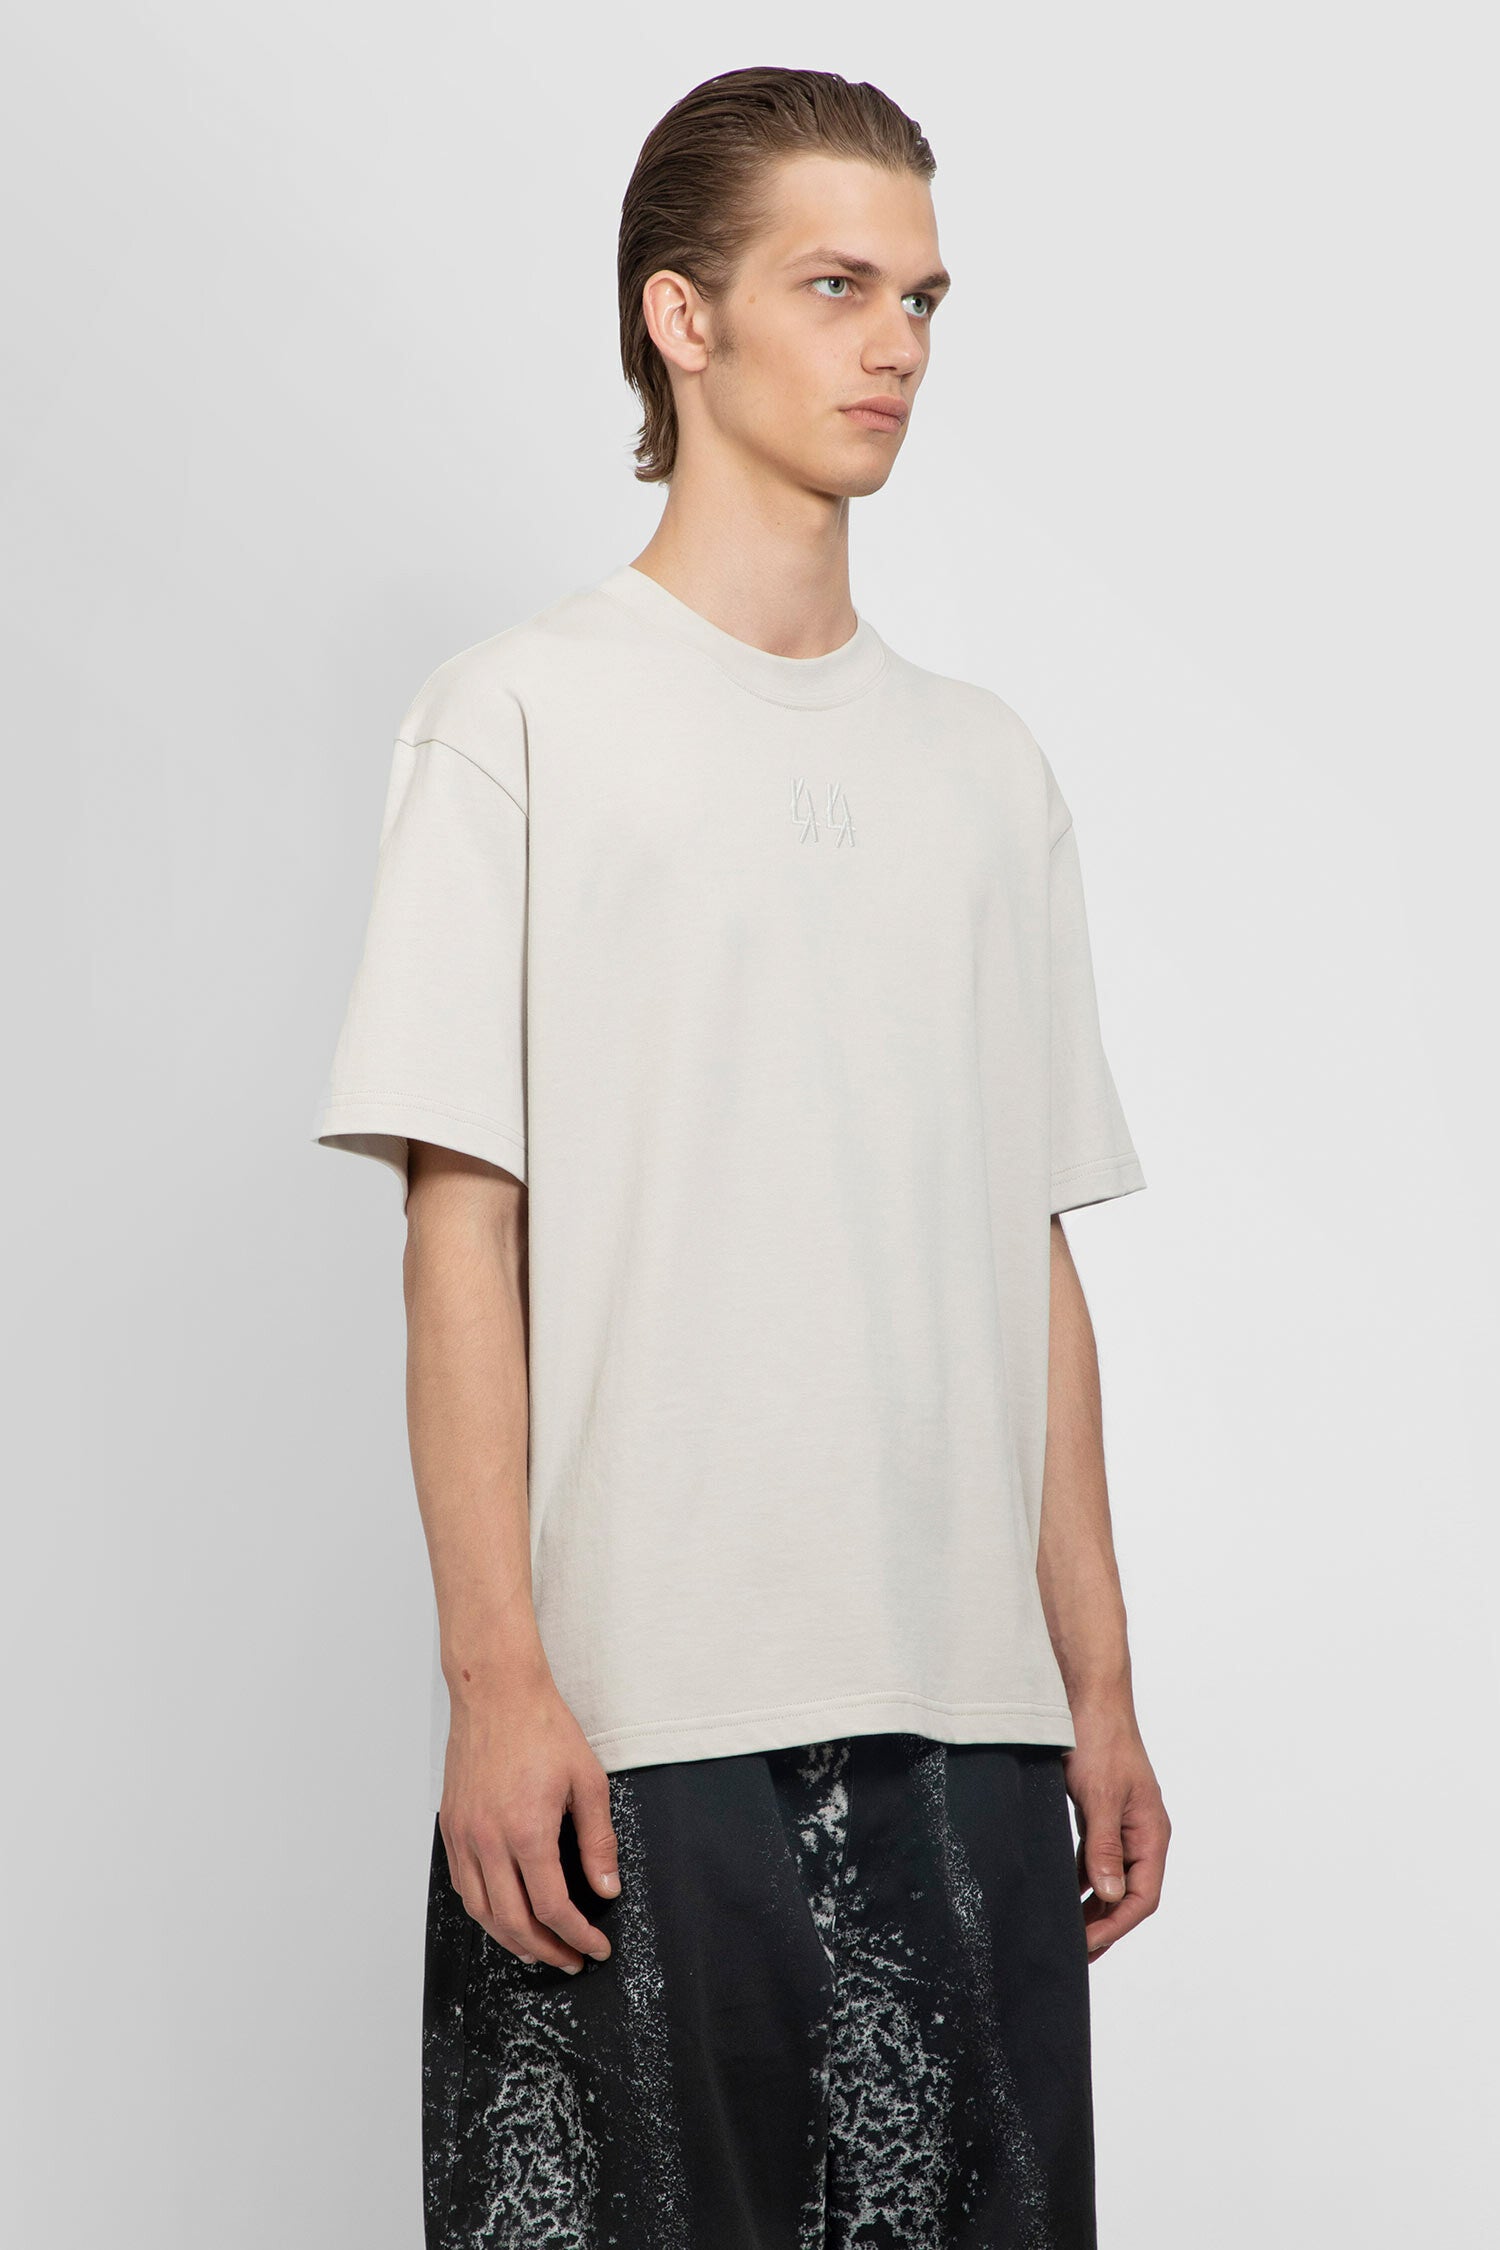 44 LABEL GROUP MAN OFF-WHITE T-SHIRTS & TANK TOPS